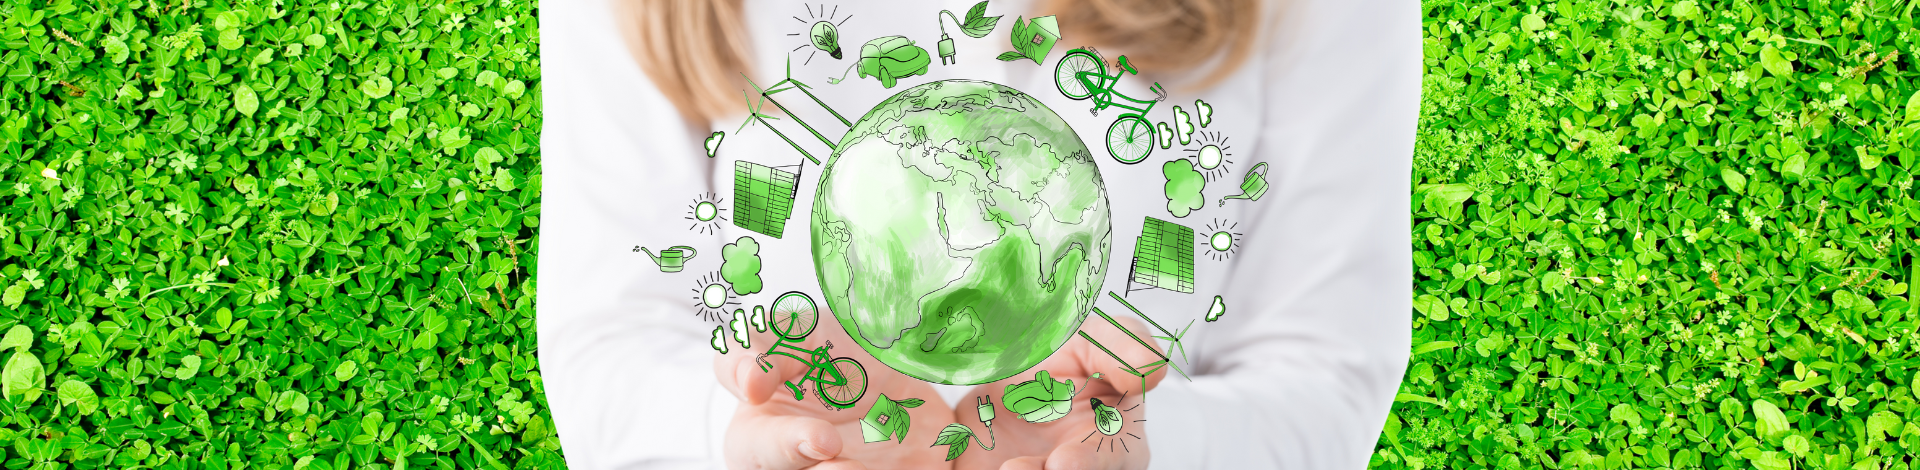 Hands holding illustration of globe surrounded by environment symbols